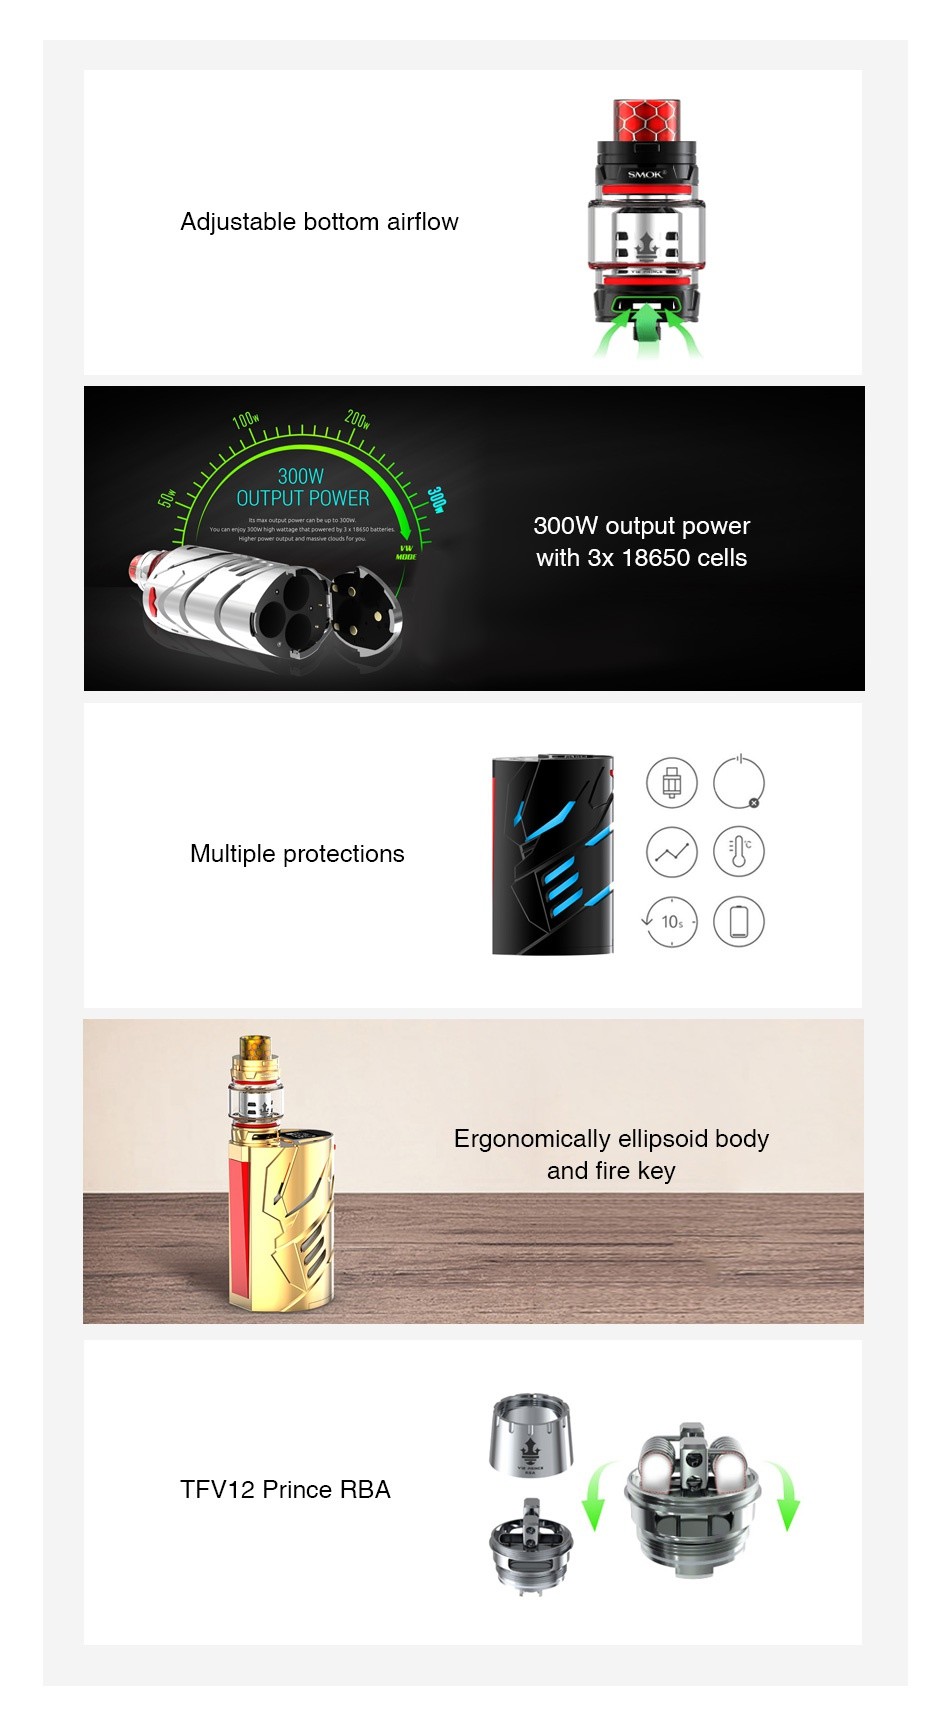 SMOK T-Priv 3 300W with TFV12 Prince TC Kit djustable bottom airflow 0 DUTPUT POWER   300W output power with 3x 18650 cells Multiple protections Ergonomically ellipsoid body and fire key TFV12 Prince rba